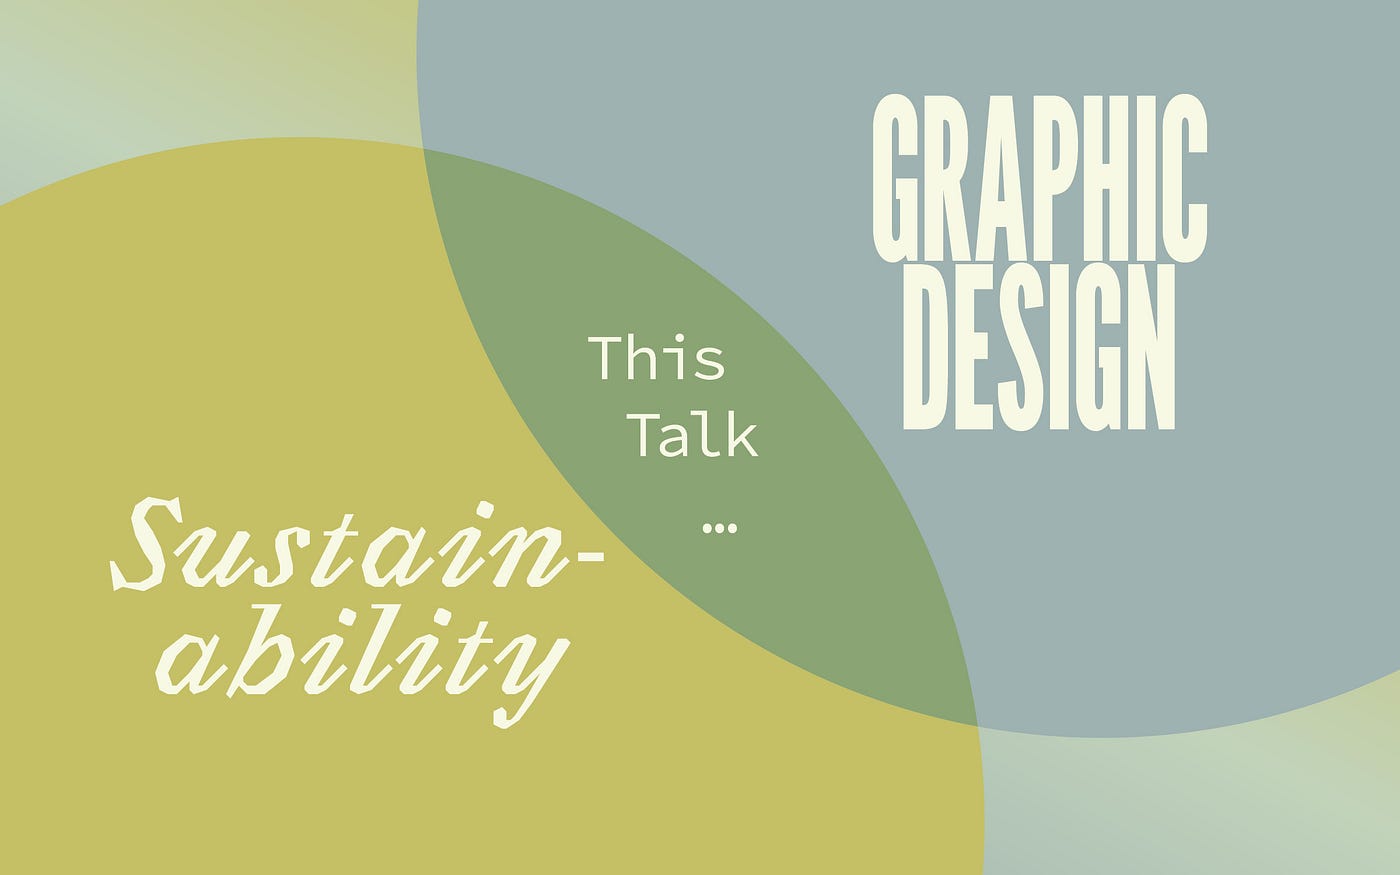 What Is Environmental Graphic Design? Definition, Examples, & Best Practices